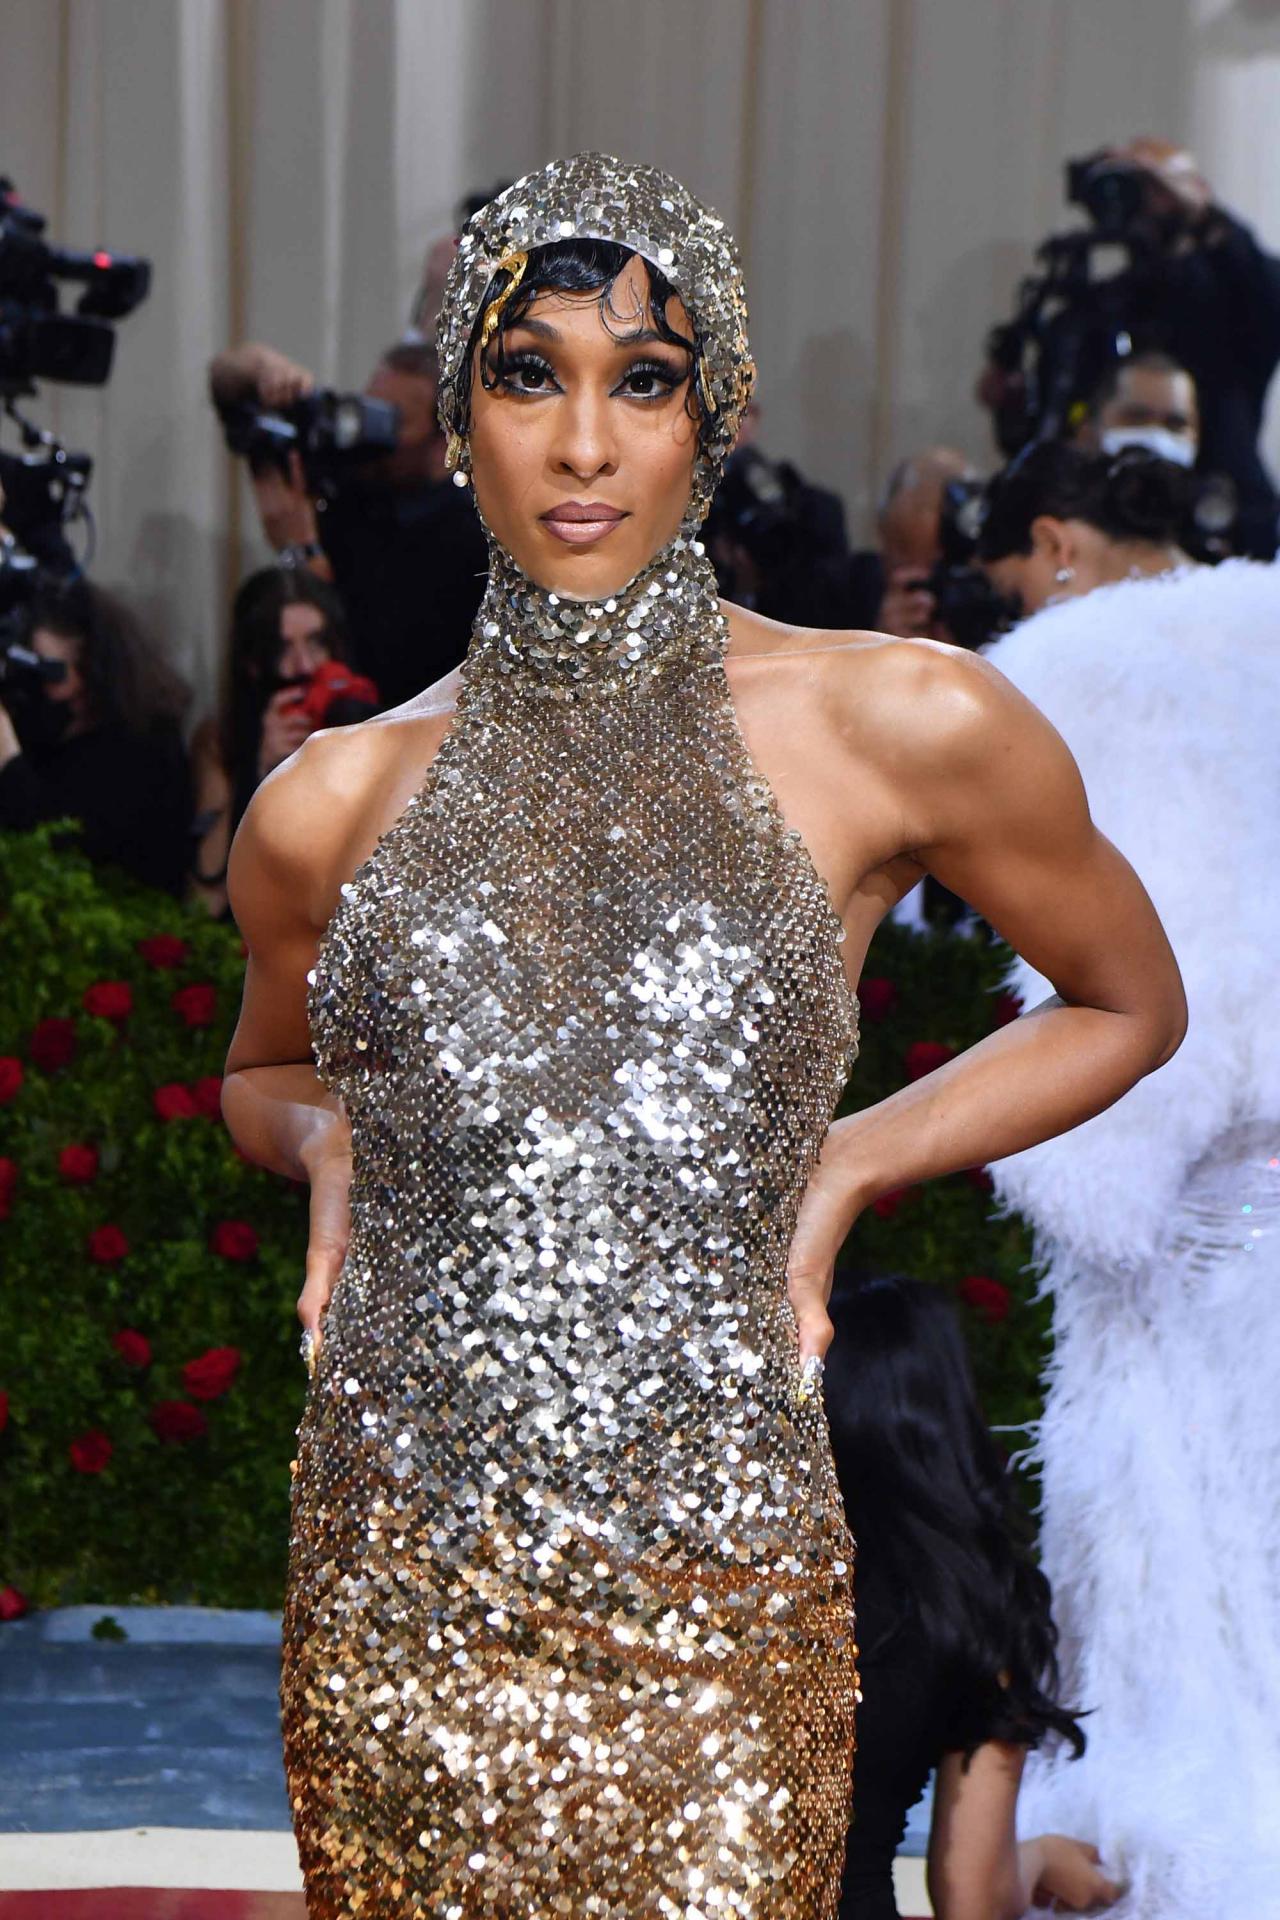 US actress Michaela Jae Rodriguez arrives for the 2022 Met Gala at the Metropolitan Museum of Art on May 2, 2022, in New York. - The Gala raises money for the Metropolitan Museum of Art's Costume Institute. The Gala's 2022 theme is "In America: An Anthology of Fashion". (Photo by ANGELA  WEISS / AFP)